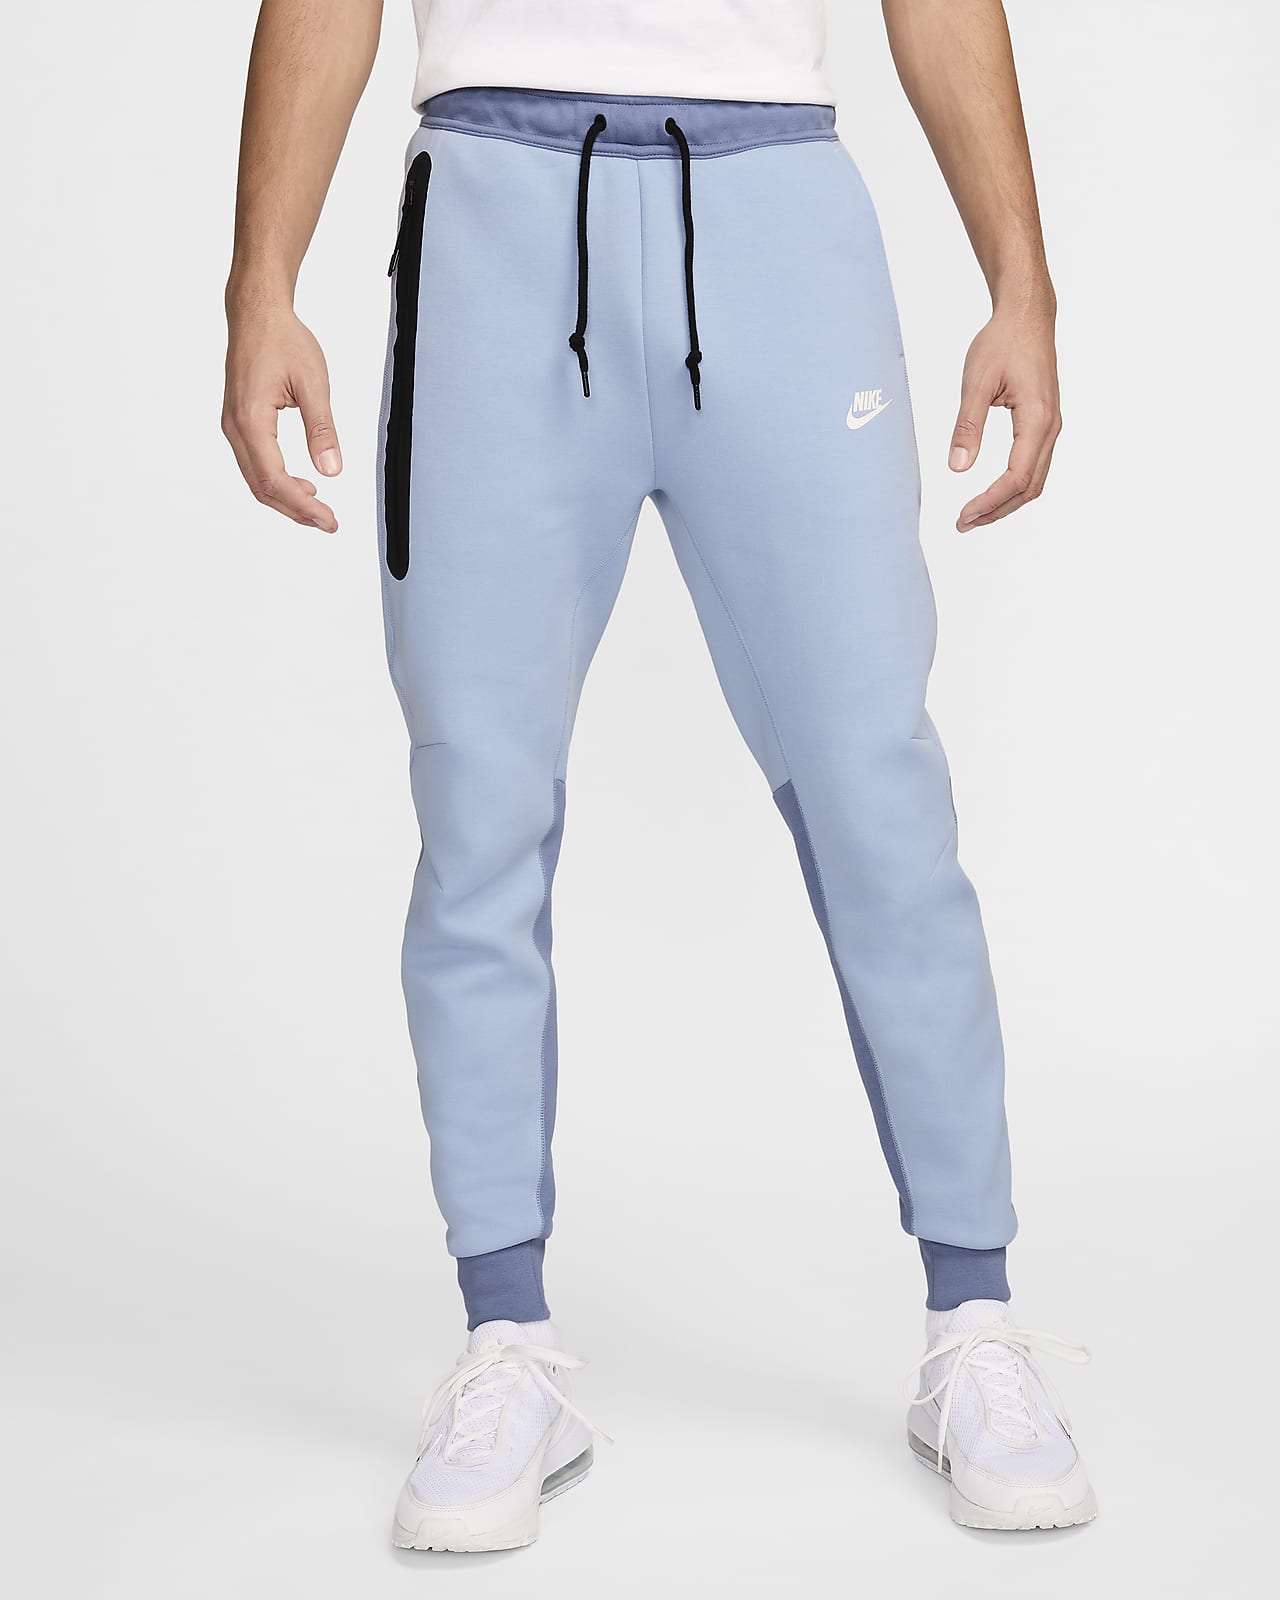 Aura Slim Fit Joggers In Heather Grey/White